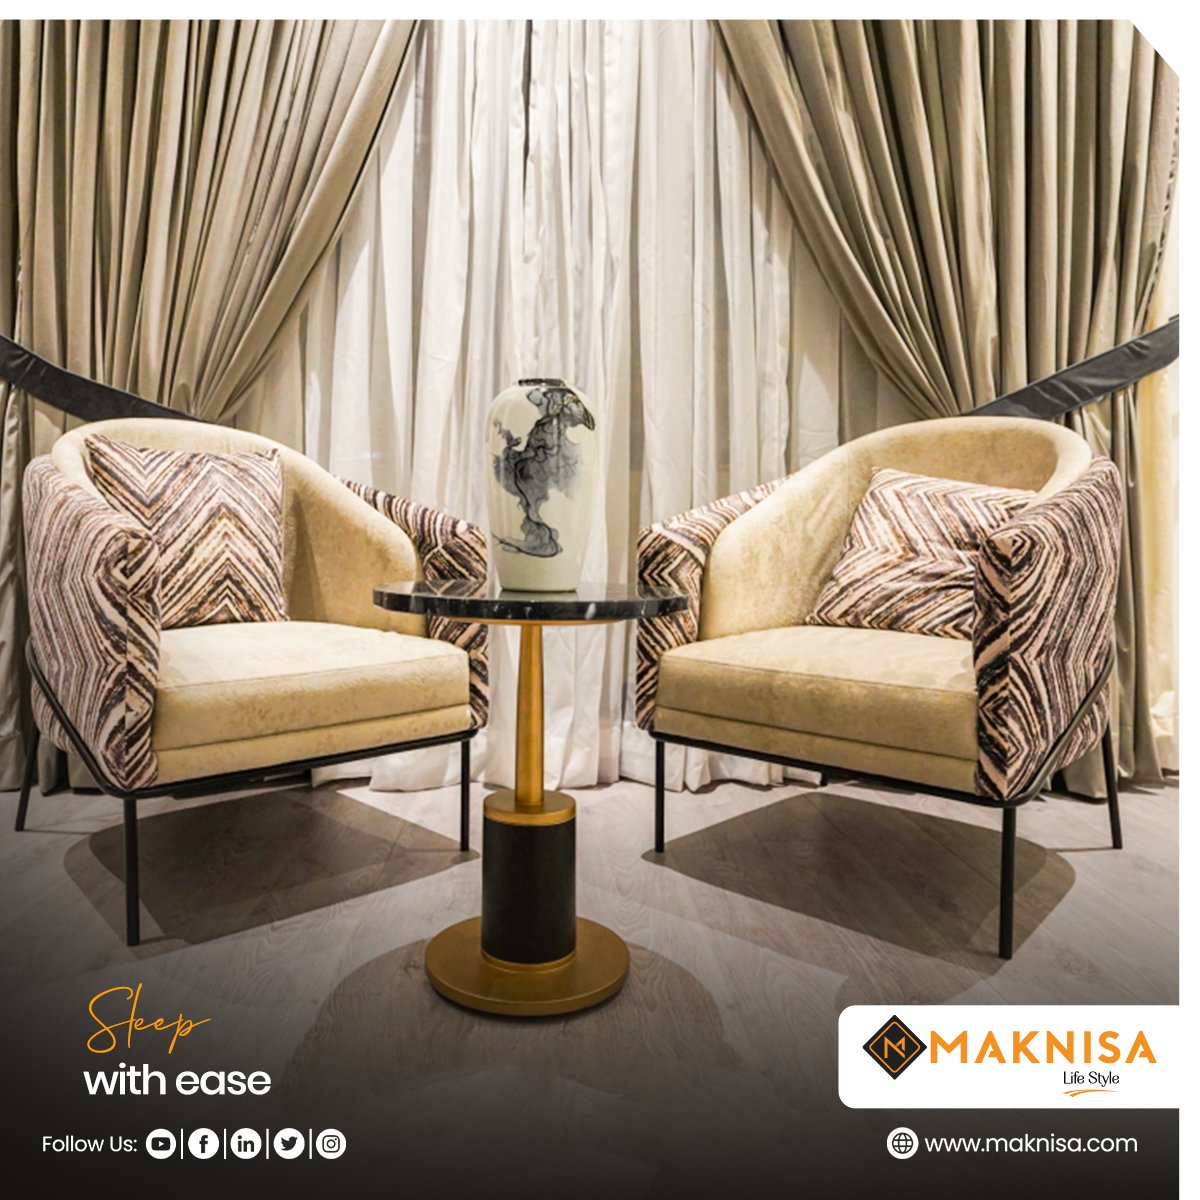 Explore luxury living at Maknisa Furniture! 

#sofa #chair #artwork #decoration #table #woodcarving #royalfurniture #bed #interiorfurniture #interiordesign #interiordecor #interiordesigner #furnitures #furnituredesign #furniture #sofaset #furnitureonline #lawnchair